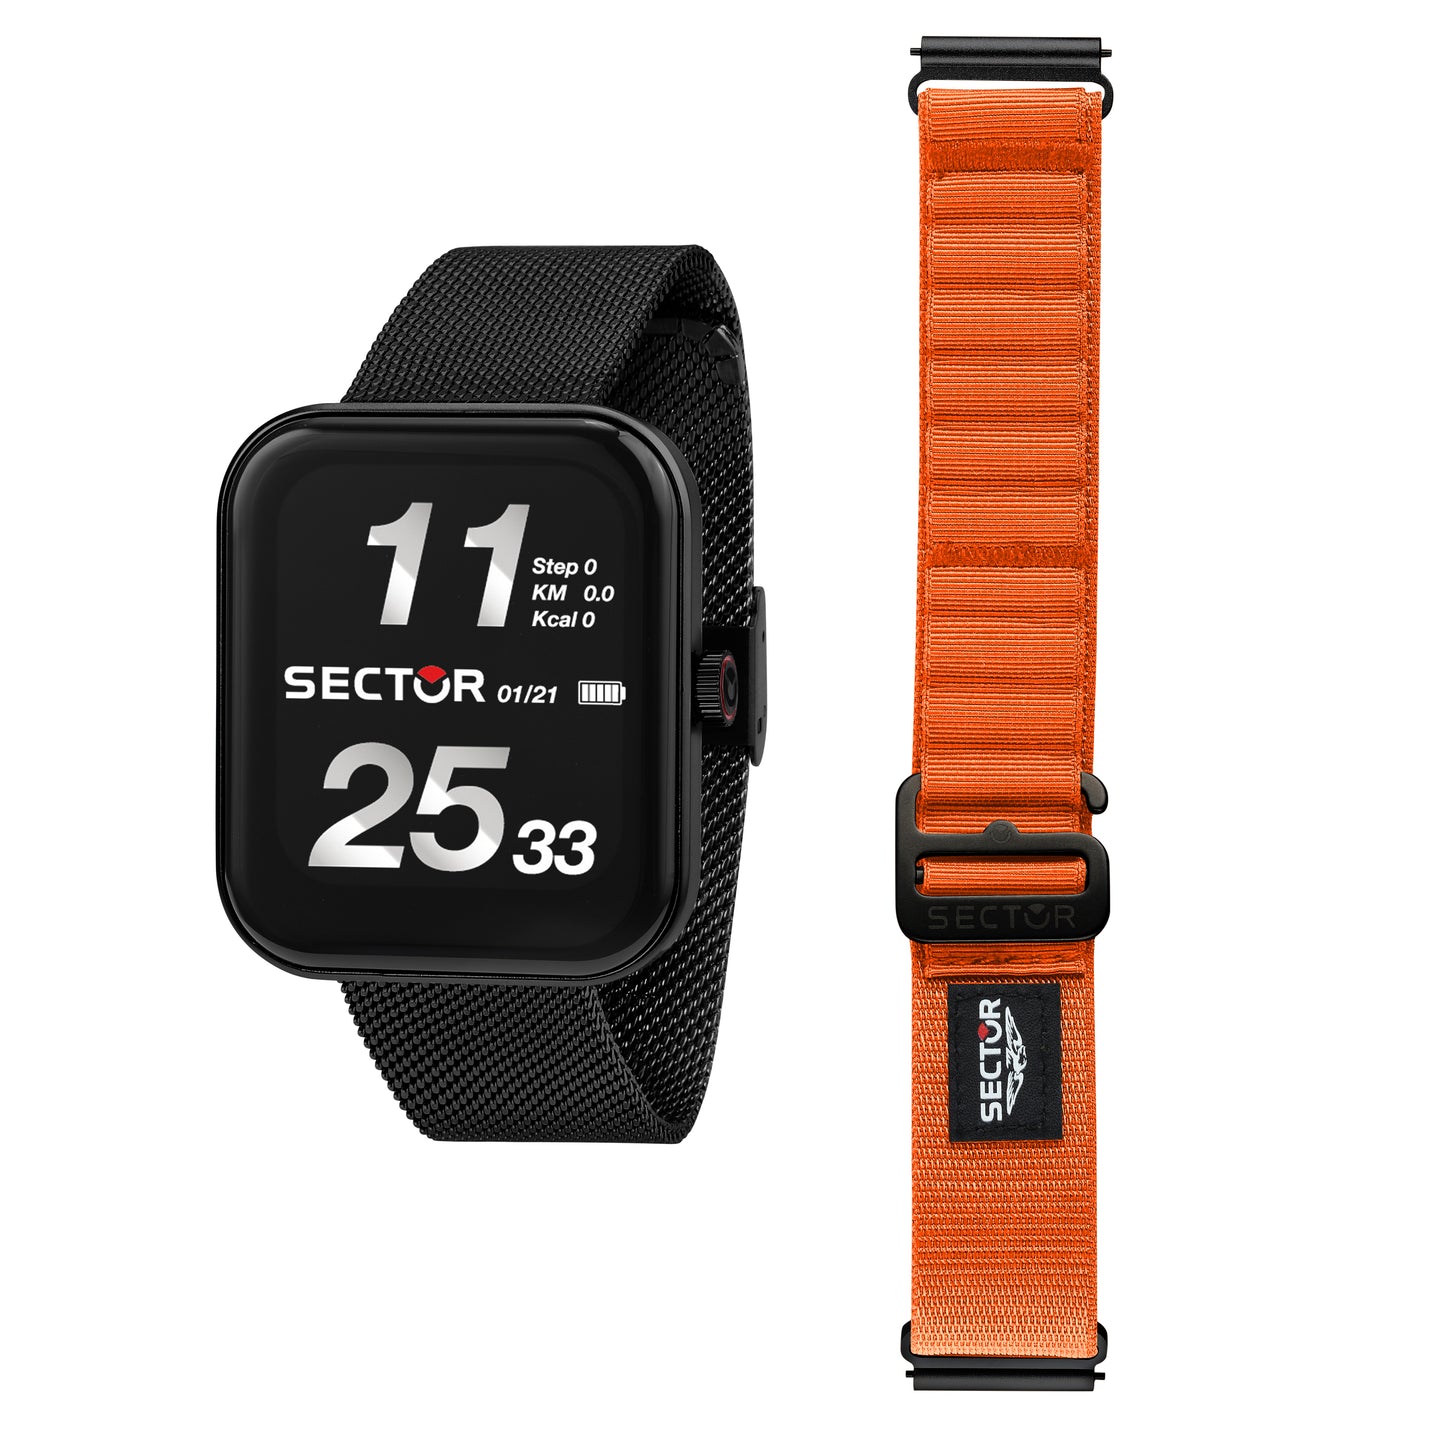 SMARTWATCH HOMME SECTOR S-03 PRO LIGHT R3253171501